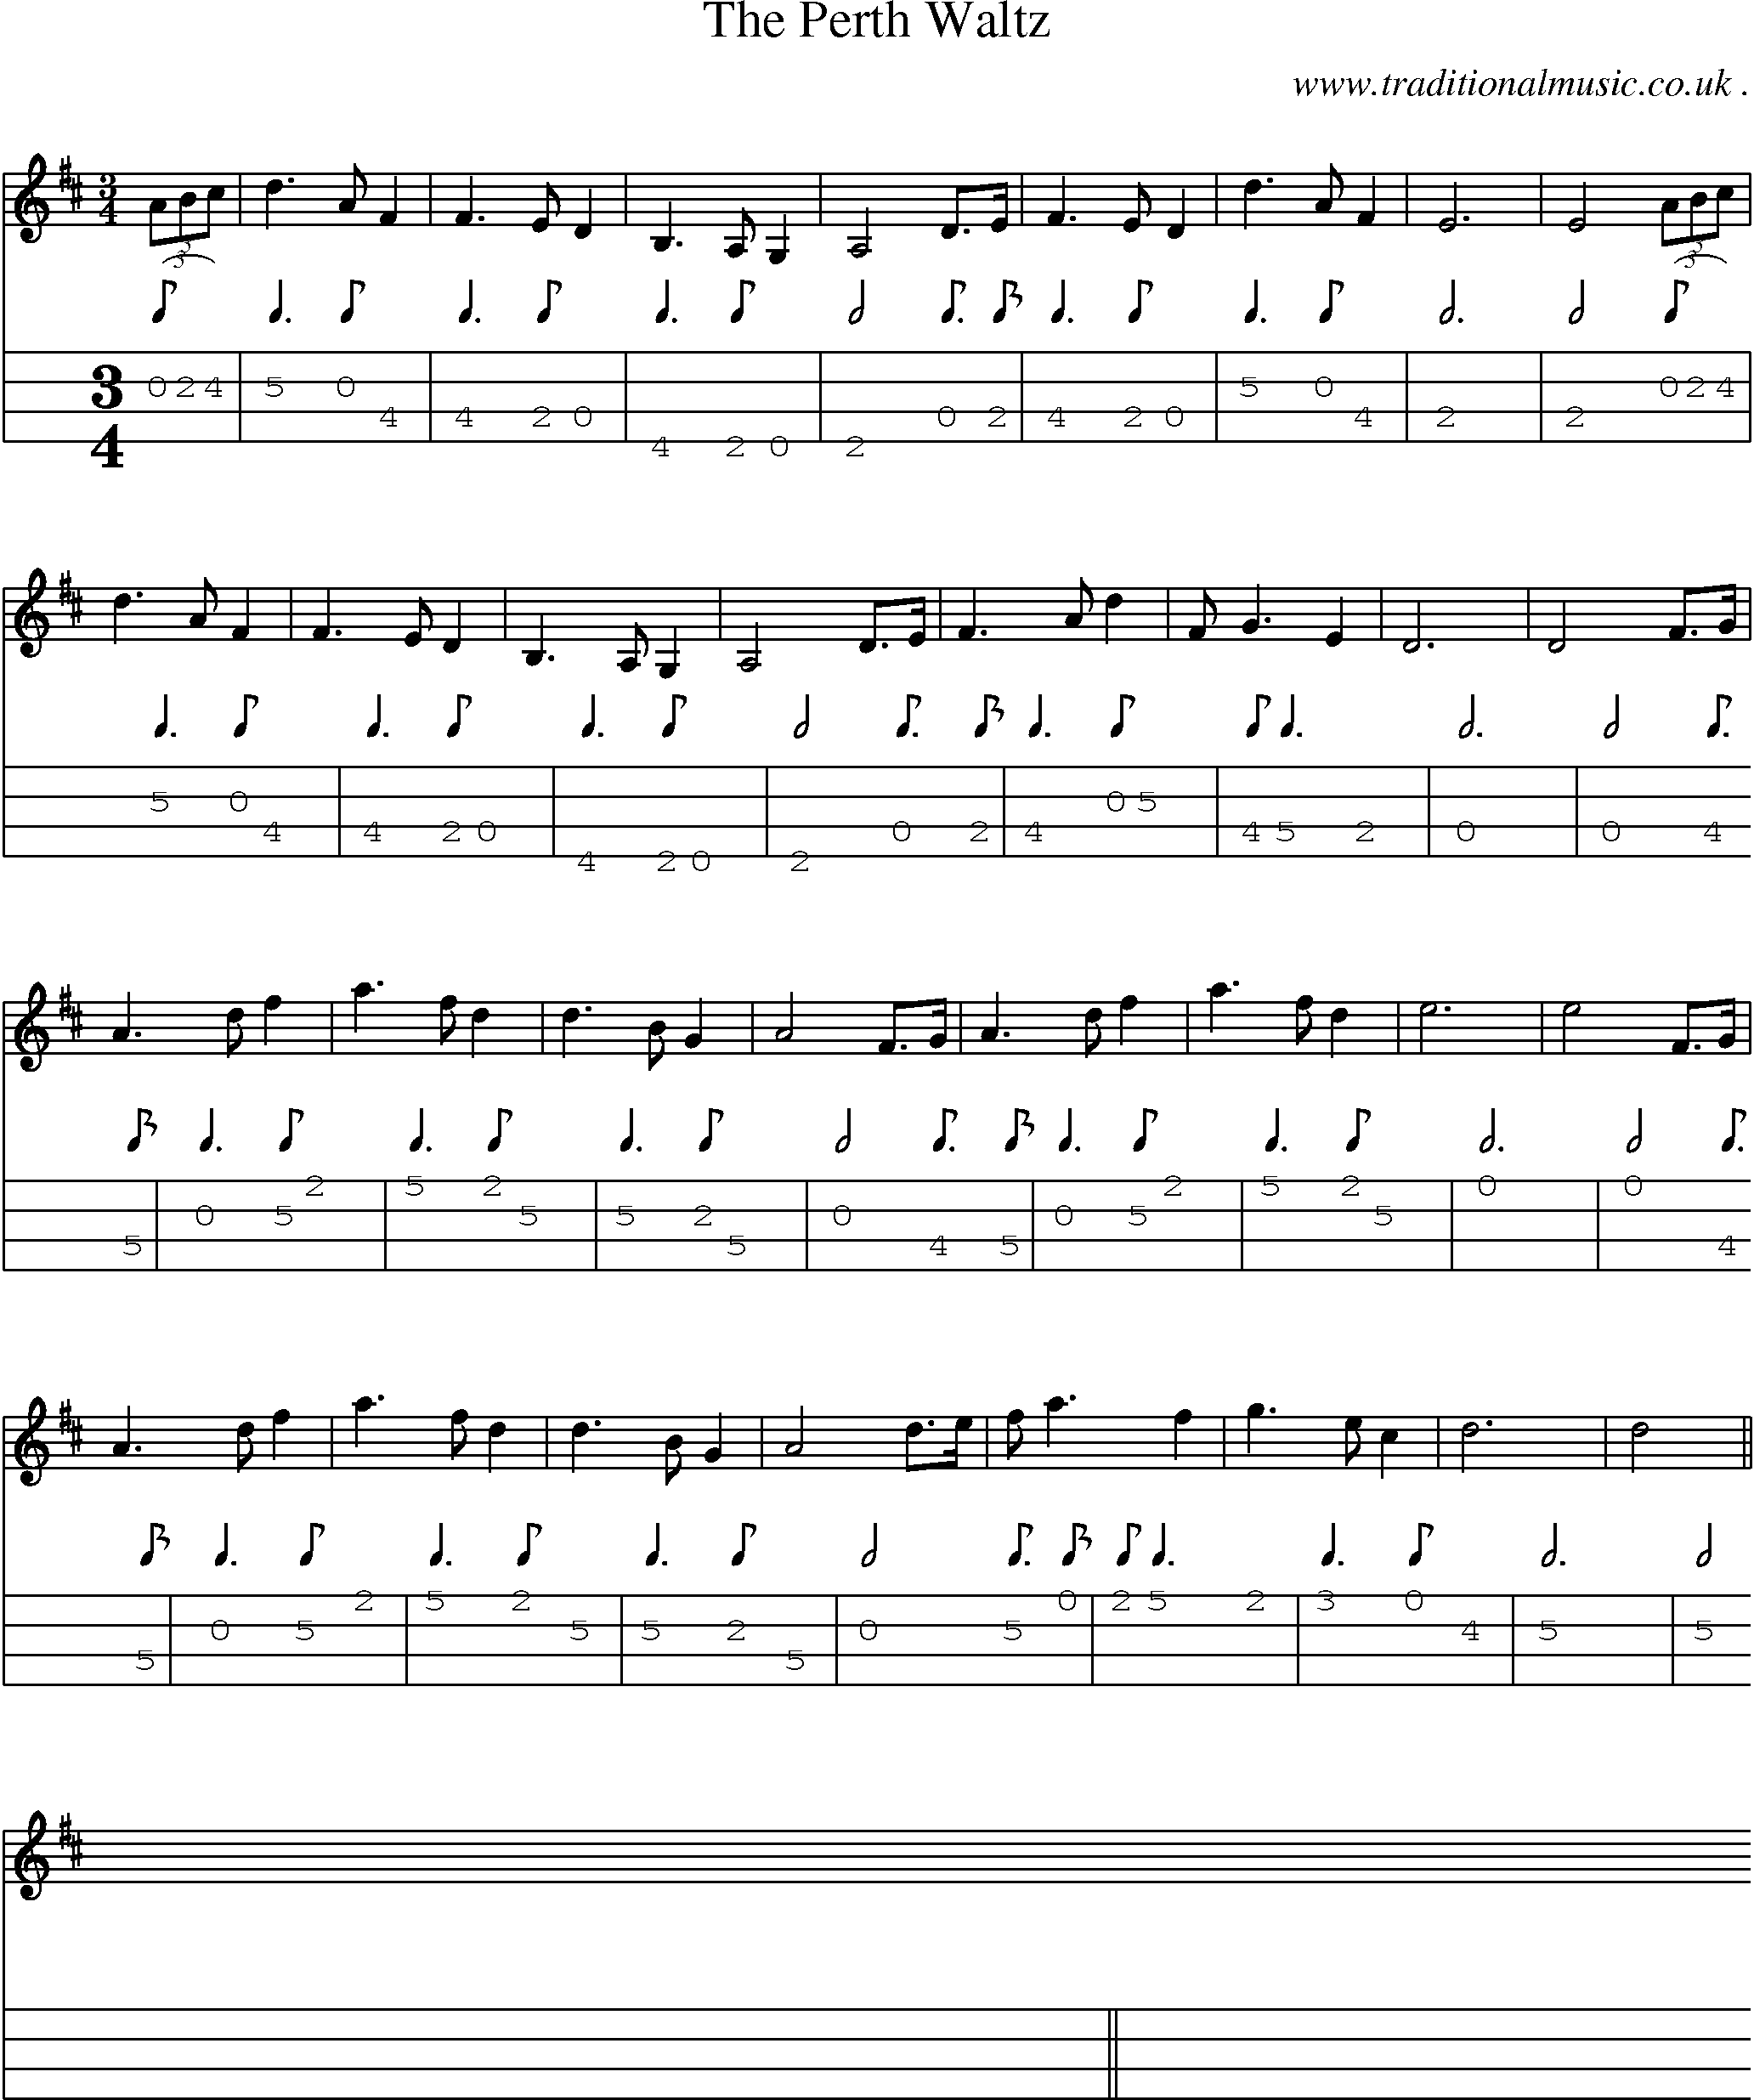 Sheet-music  score, Chords and Mandolin Tabs for The Perth Waltz